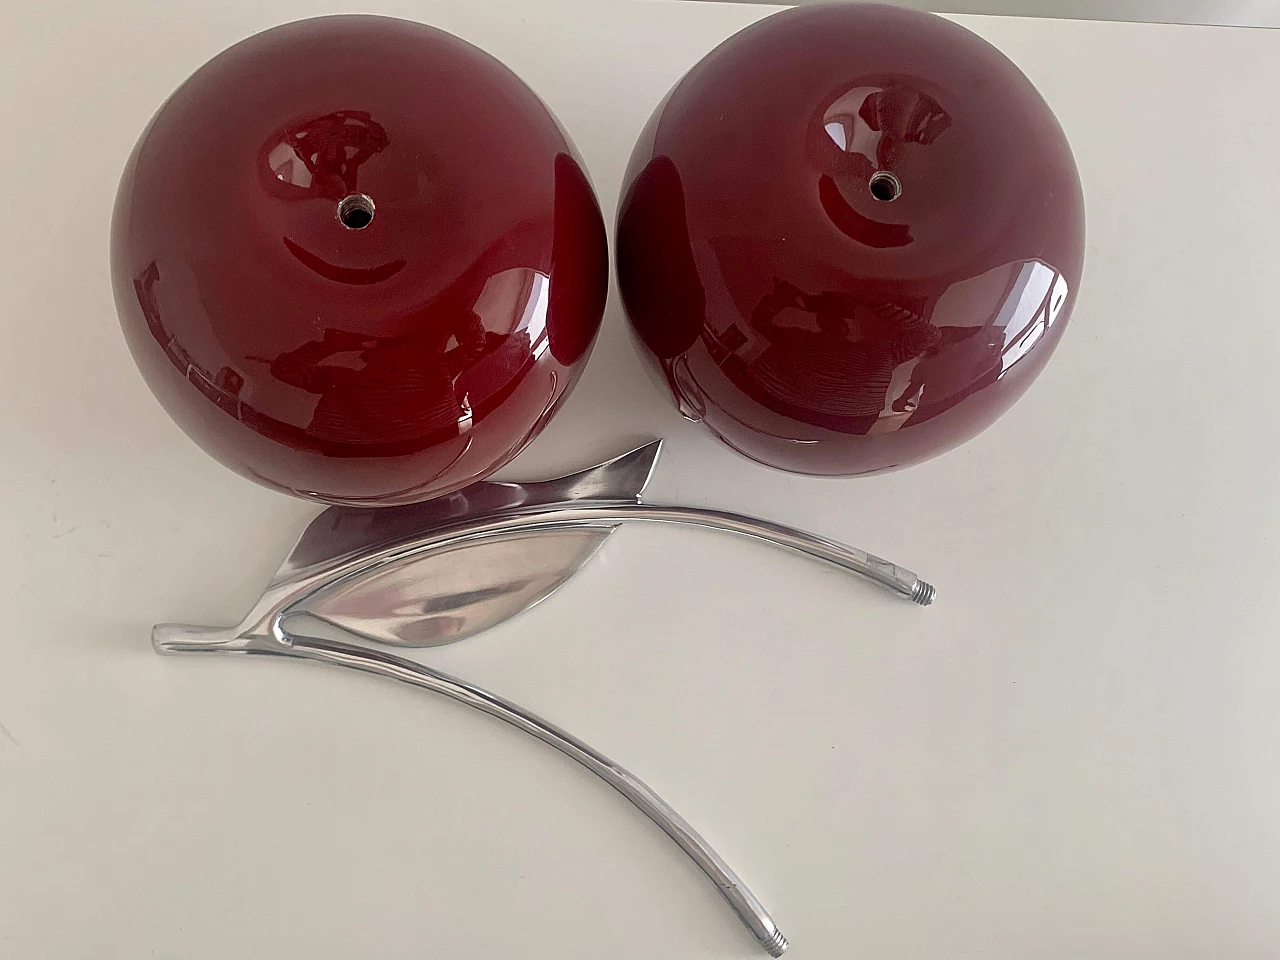 Cherry sculpture in resin and silver-plated metal, 2000s 20